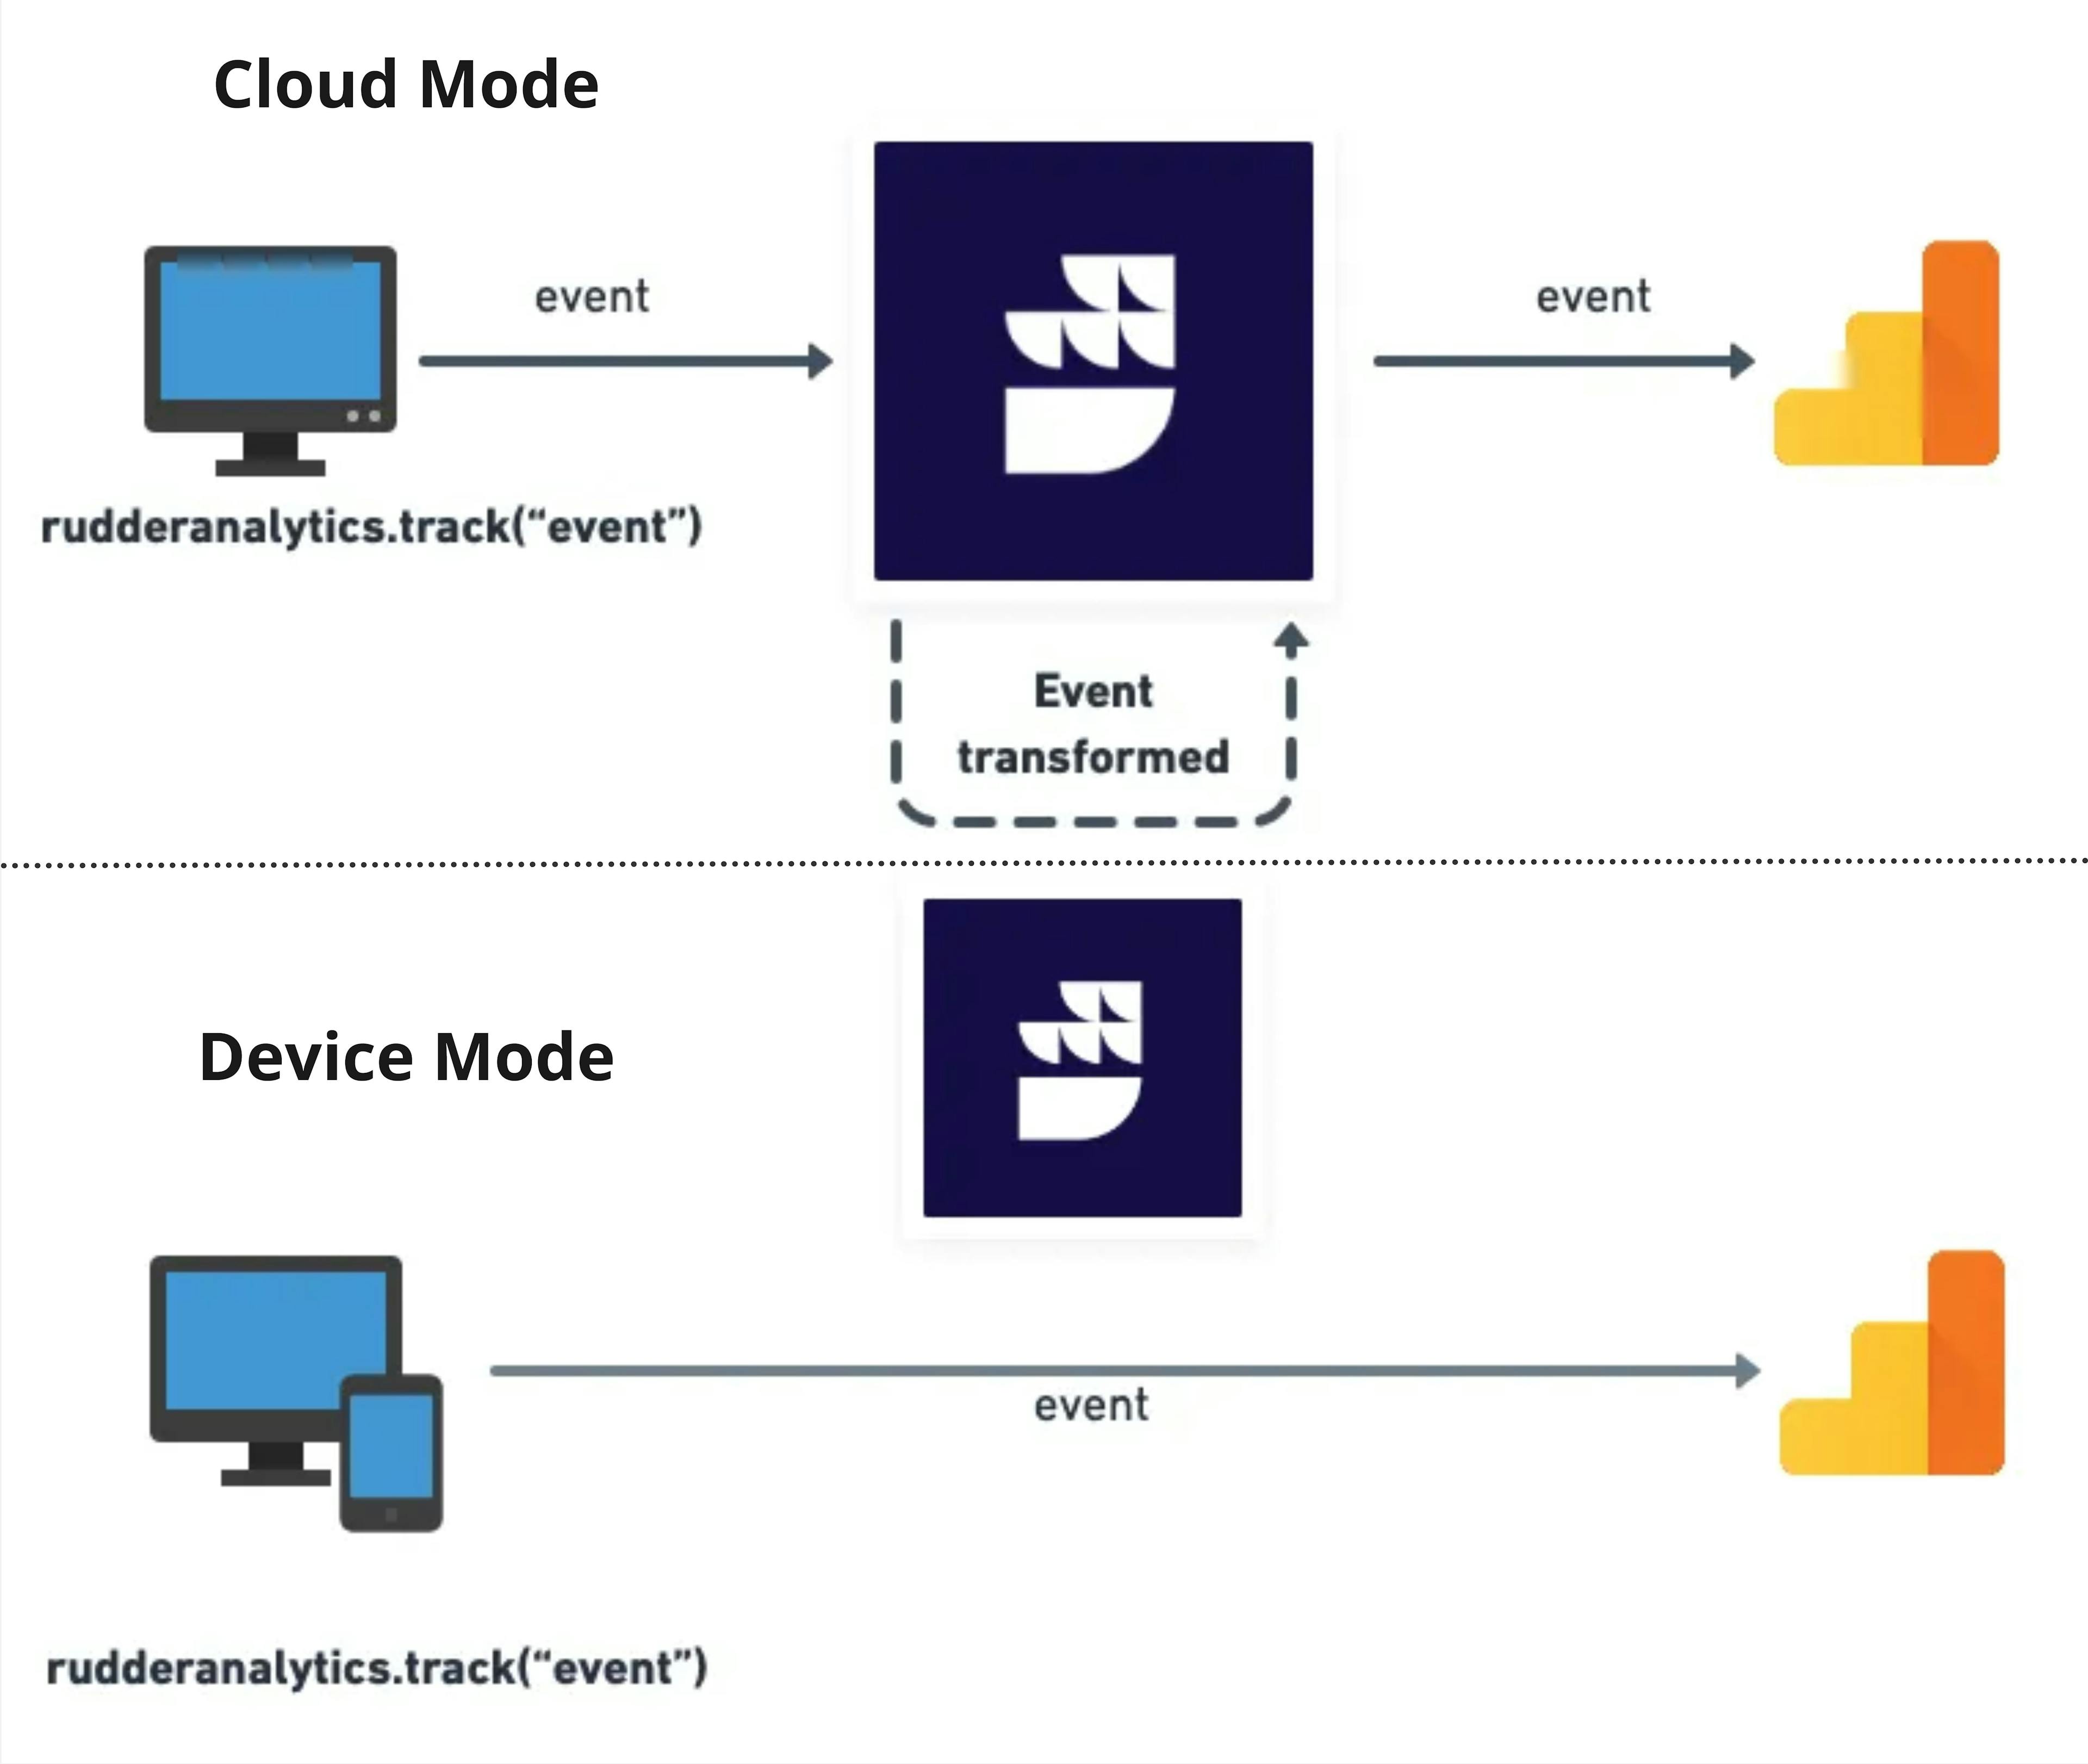 RudderStack Cloud Mode and Device Mode